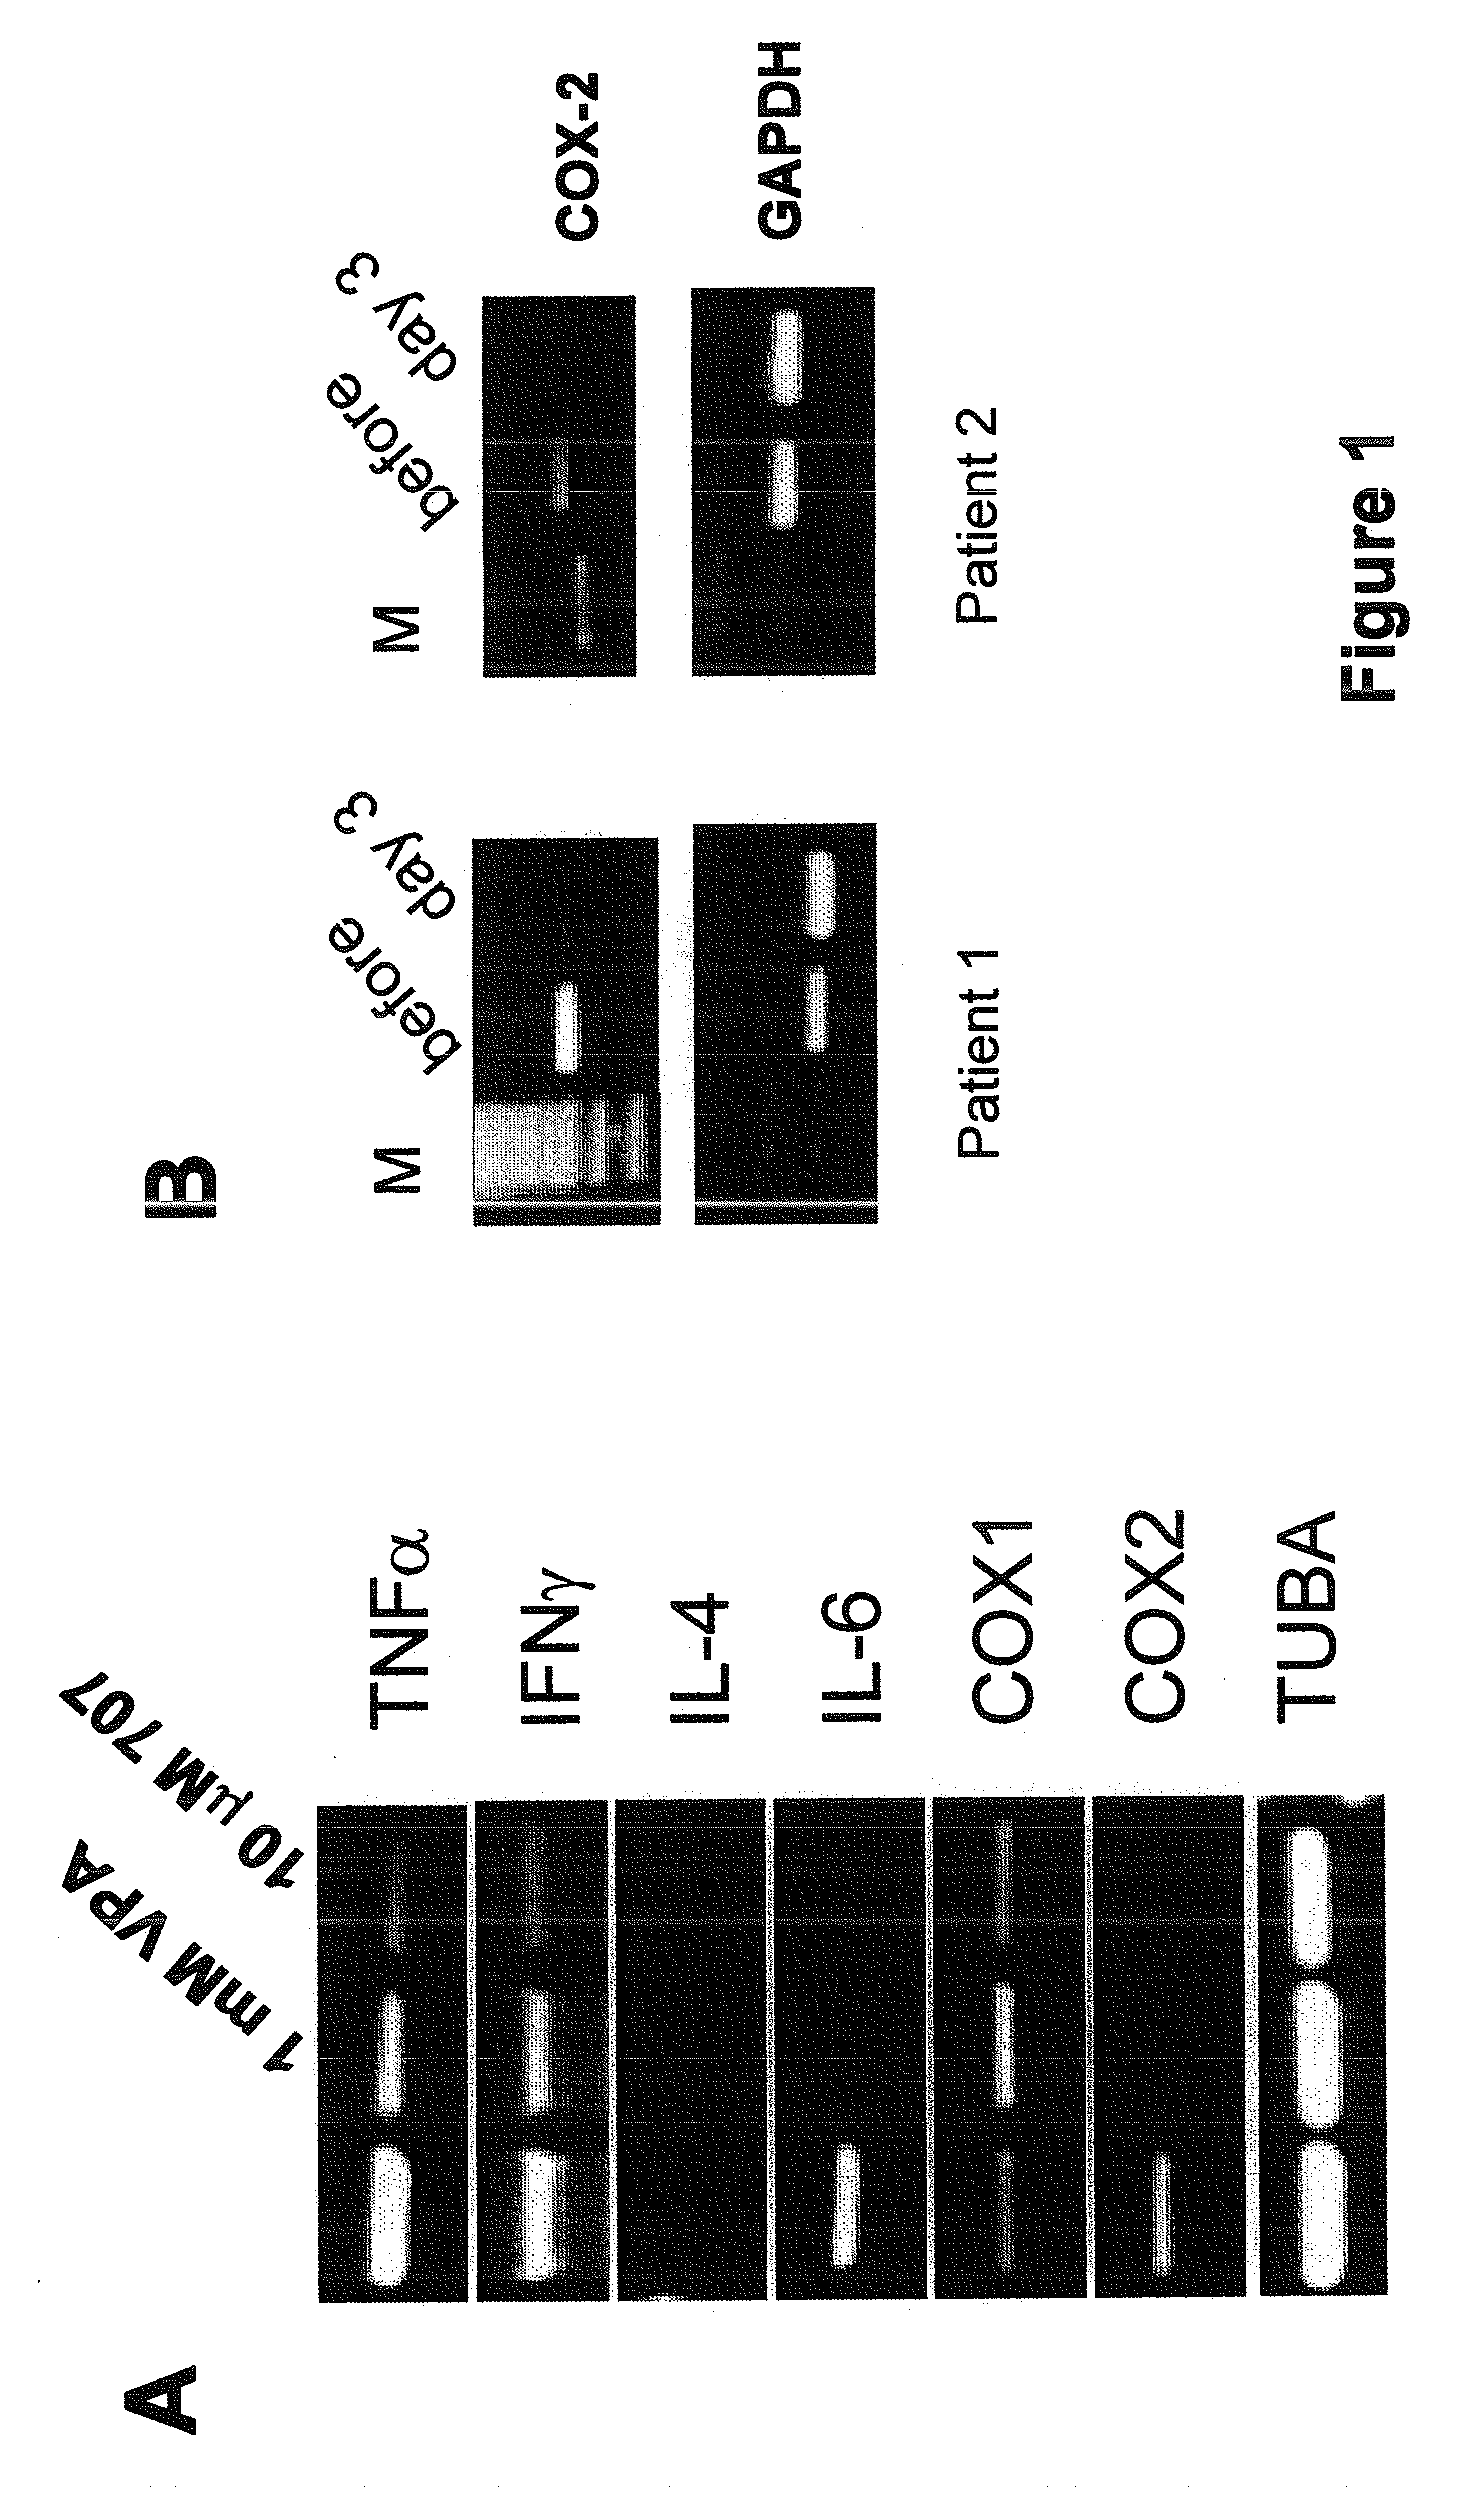 Use of Inhibitors of Histone Deacteylases in Combination With Compounds Acting as Nsaid for the Therapy of Human Diseases